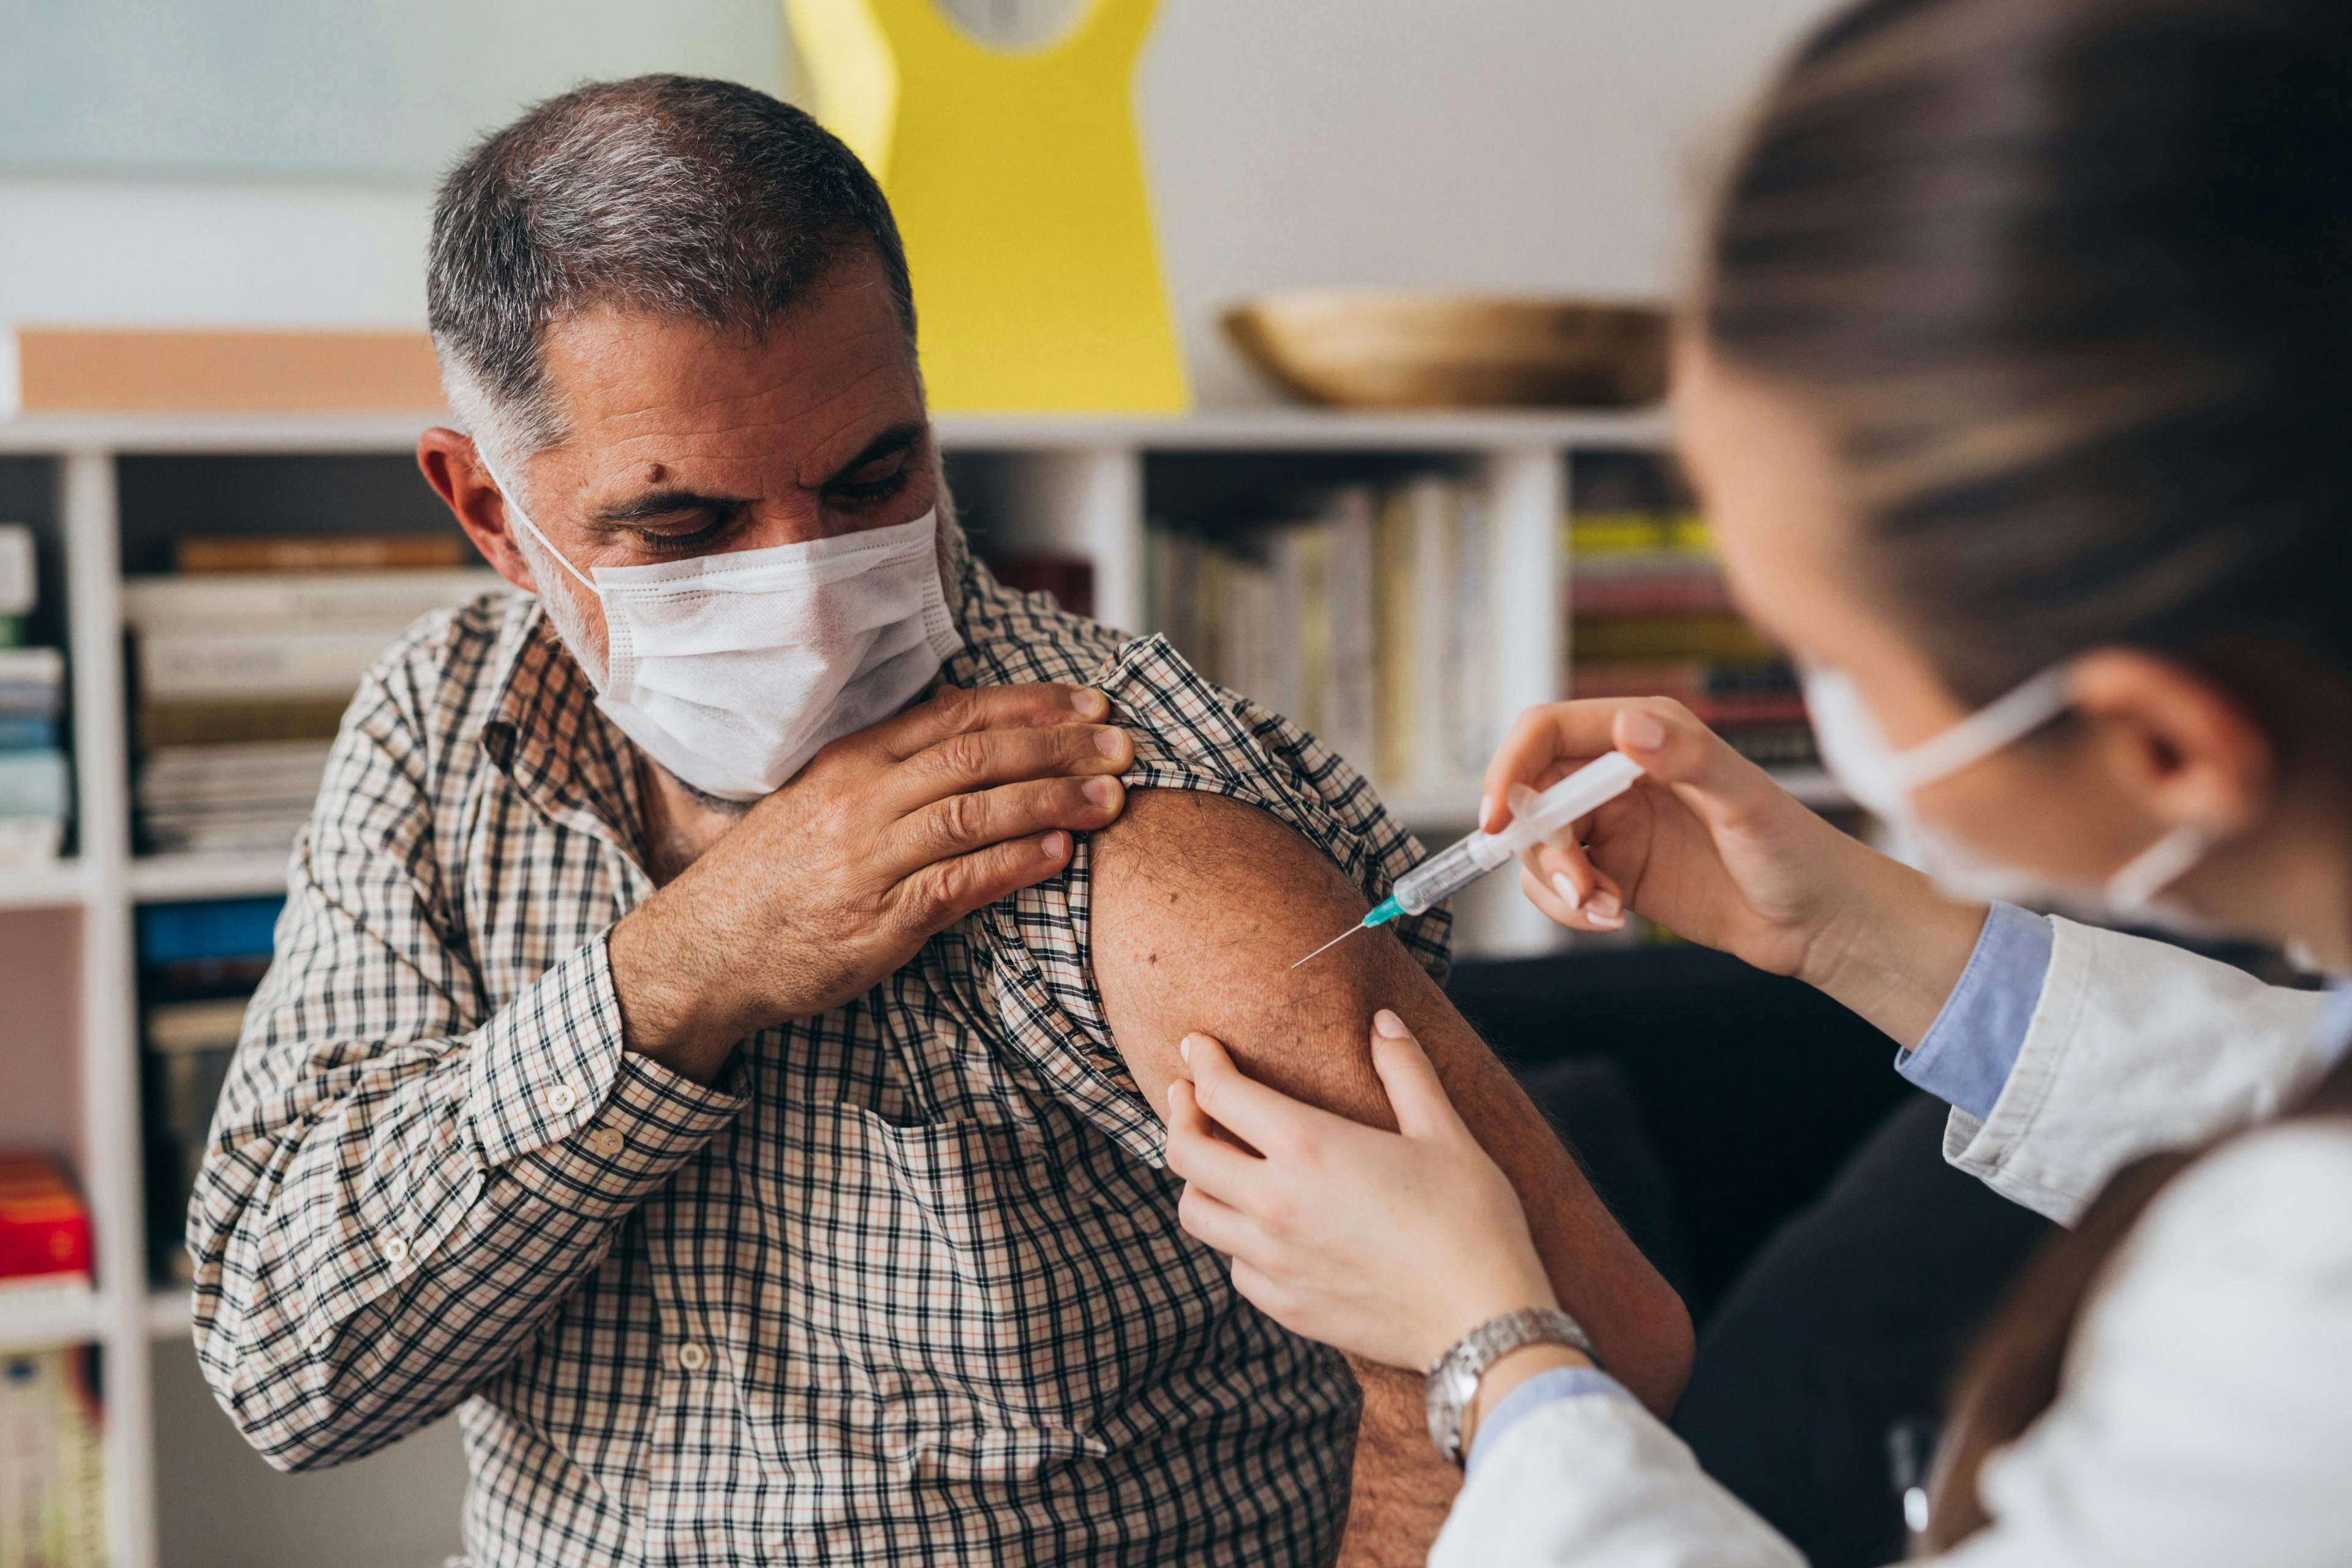 A doctor is administering a vaccine to a patient | cherryandbees - stock.adobe.com